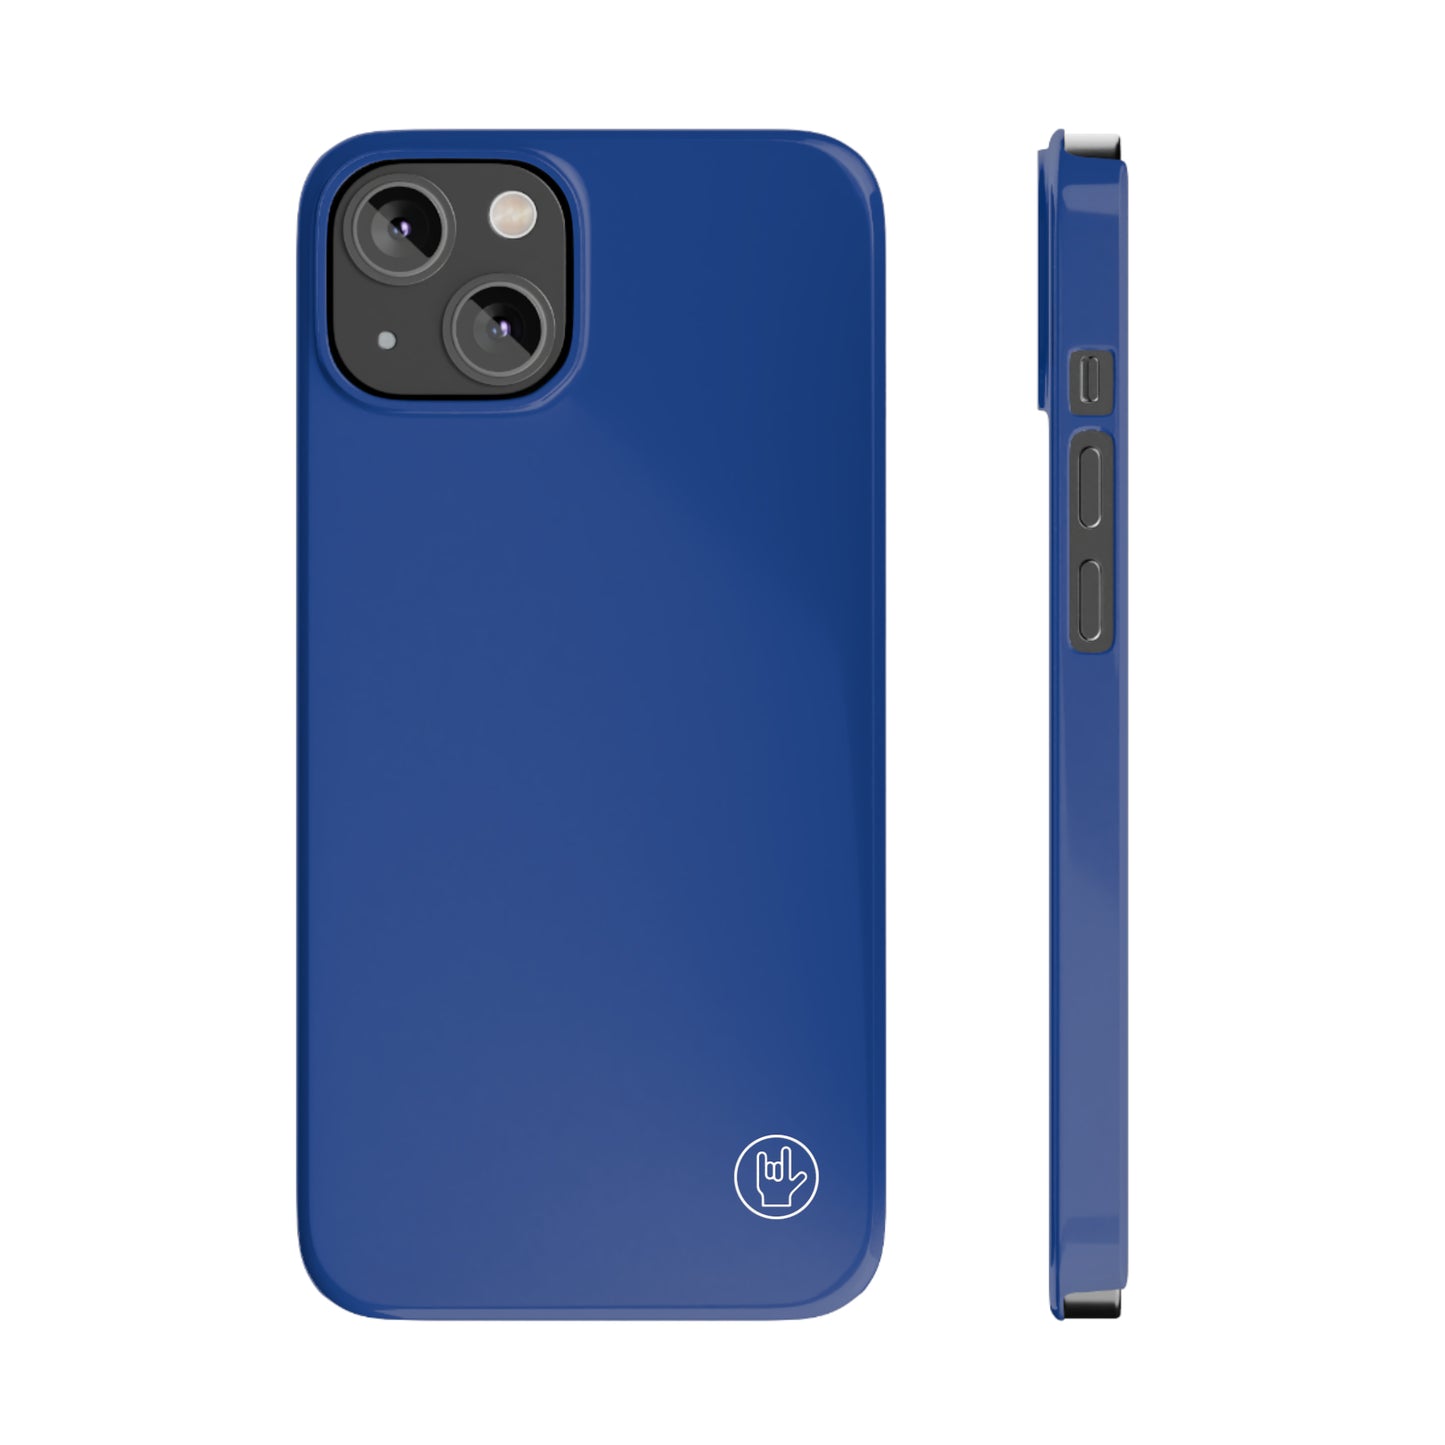 Blue Phone Case - Solid Color Phone Case - Premium Slim Cases for iPhone and Samsung